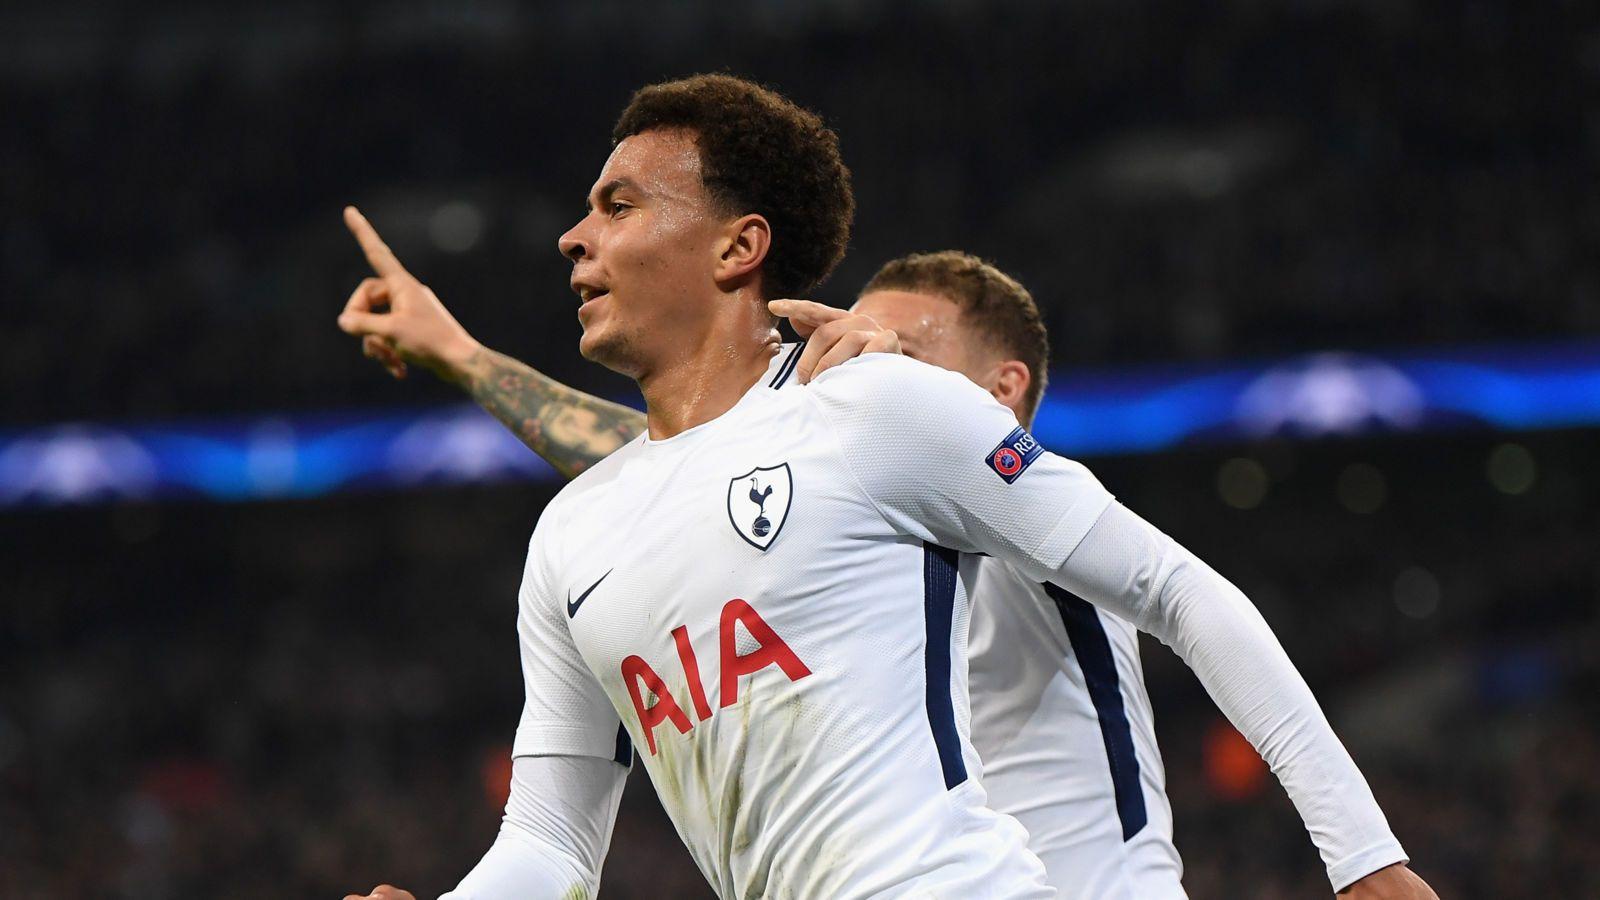 Tottenham's Dele Alli wanted by super agent Jorge Mendes' agency